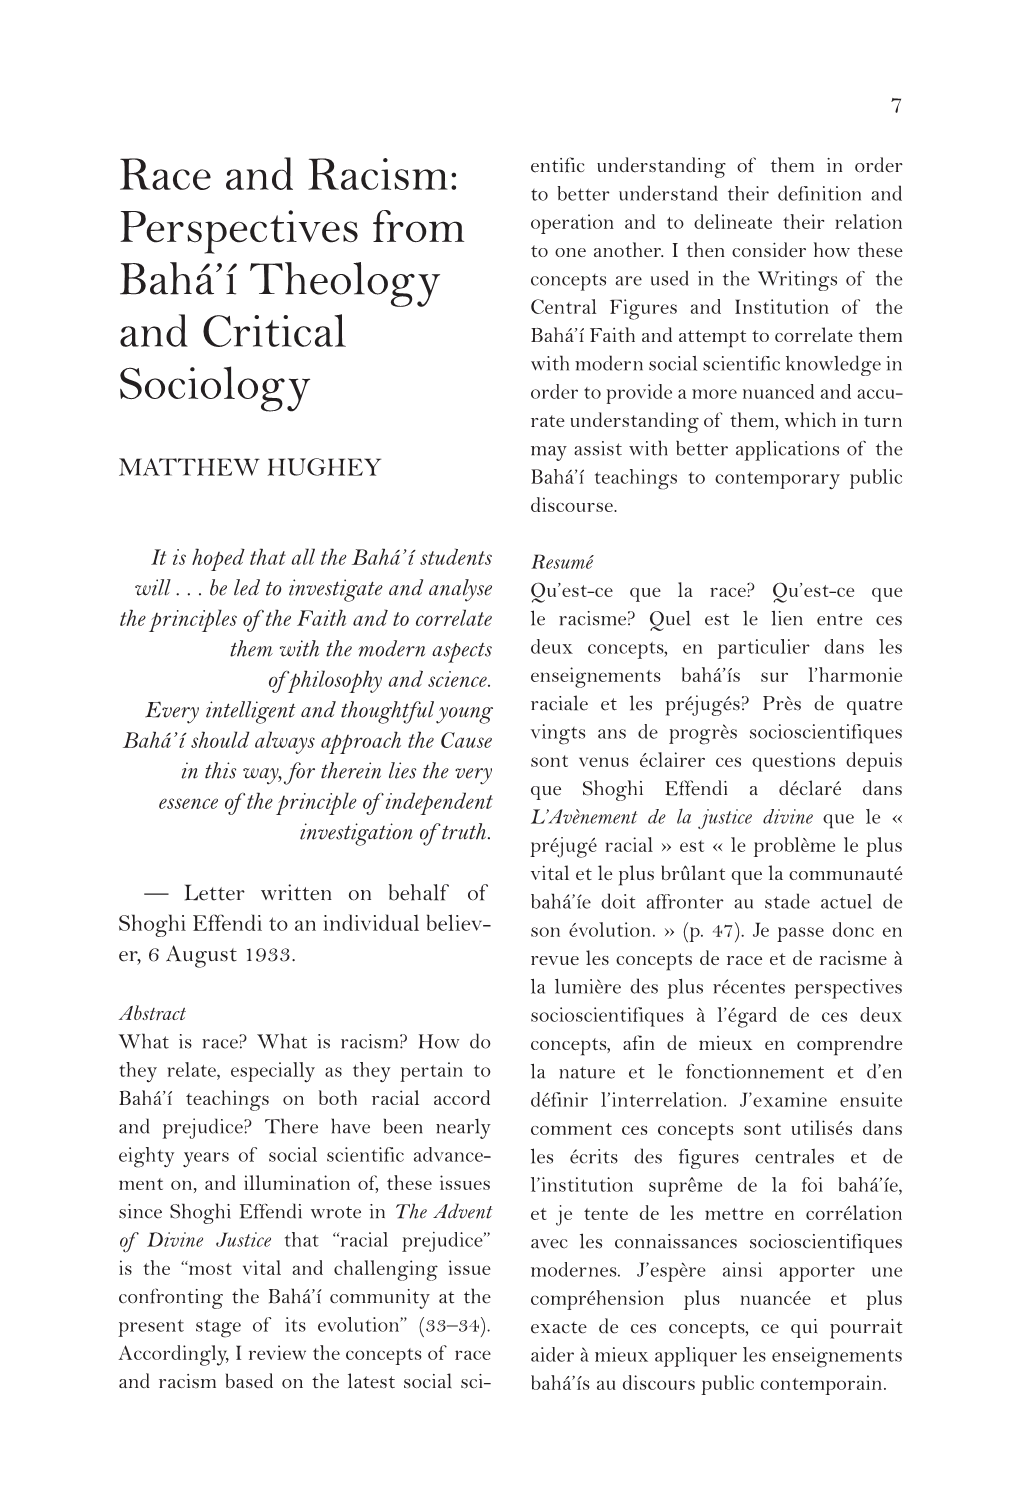 Race and Racism: Perspectives from Bahá'í Theology and Critical